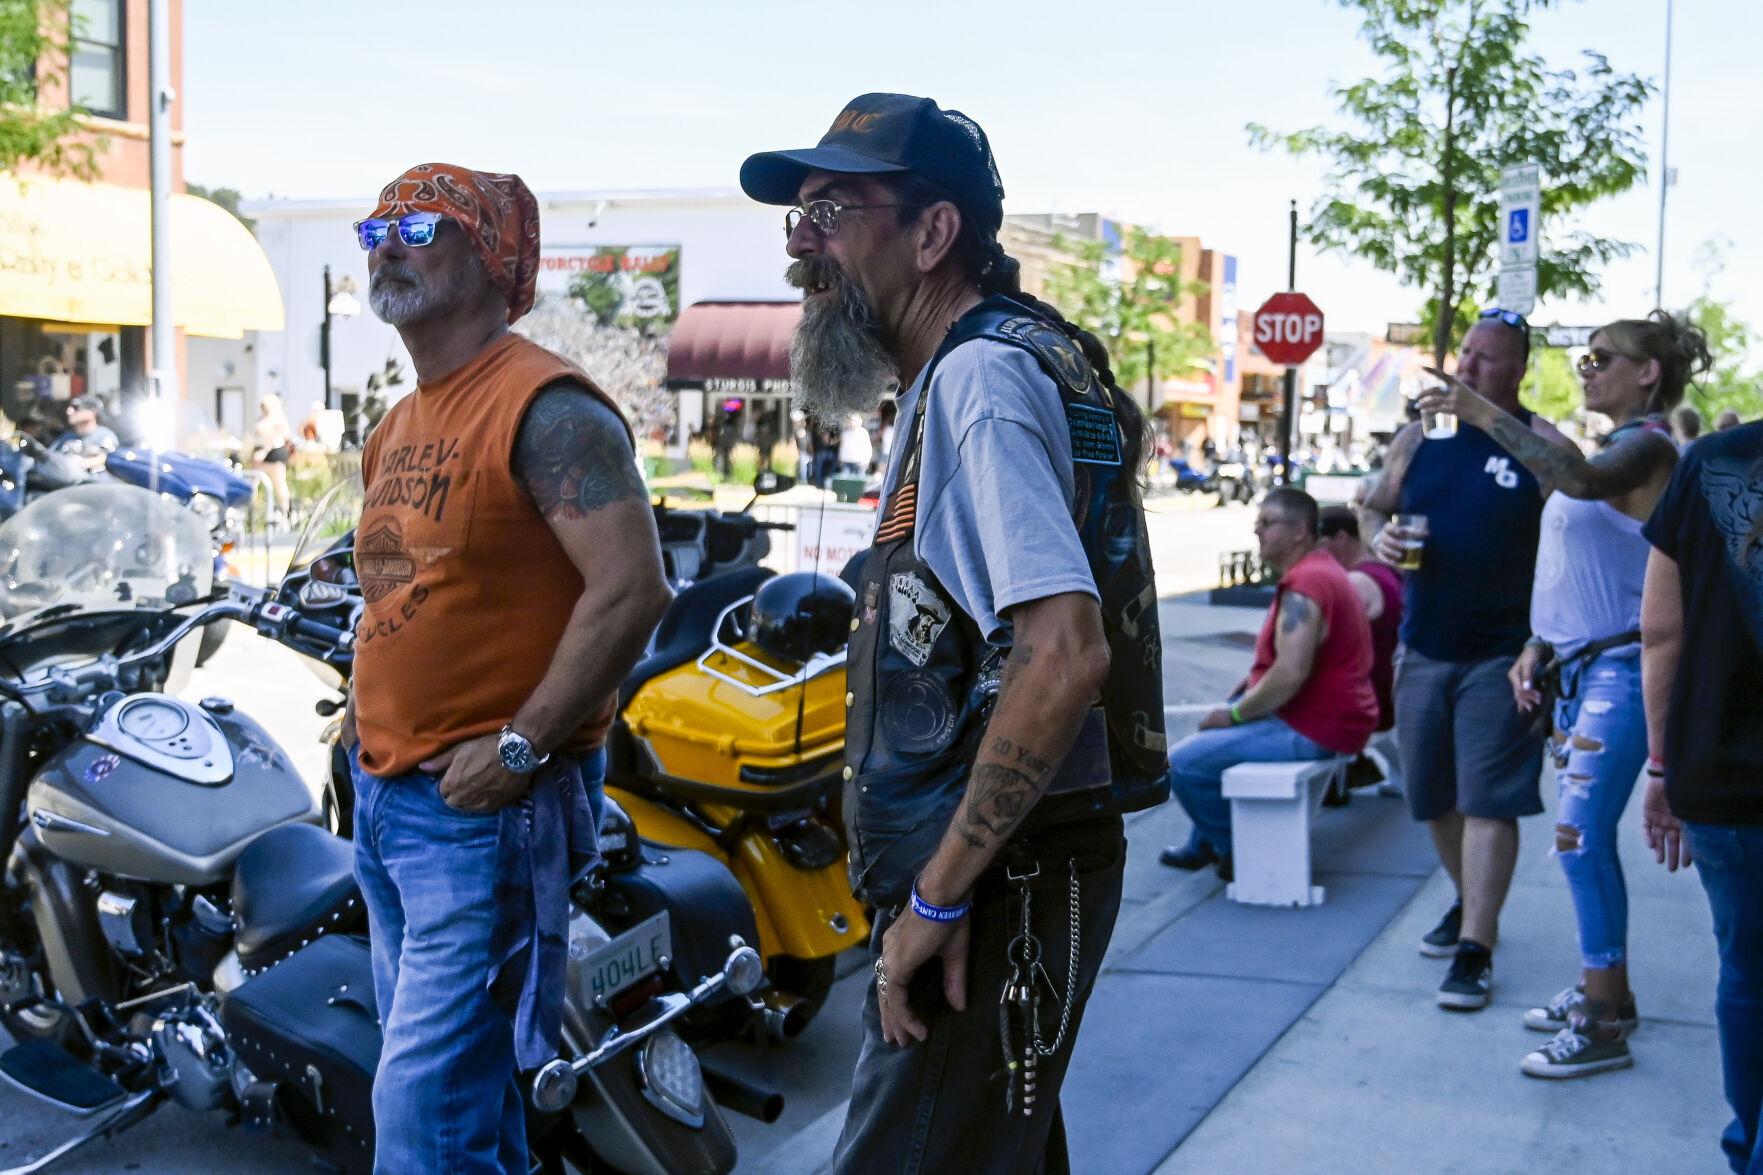 PHOTOS and VIDEO Scenes from the Sturgis Motorcycle Rally on Thursday